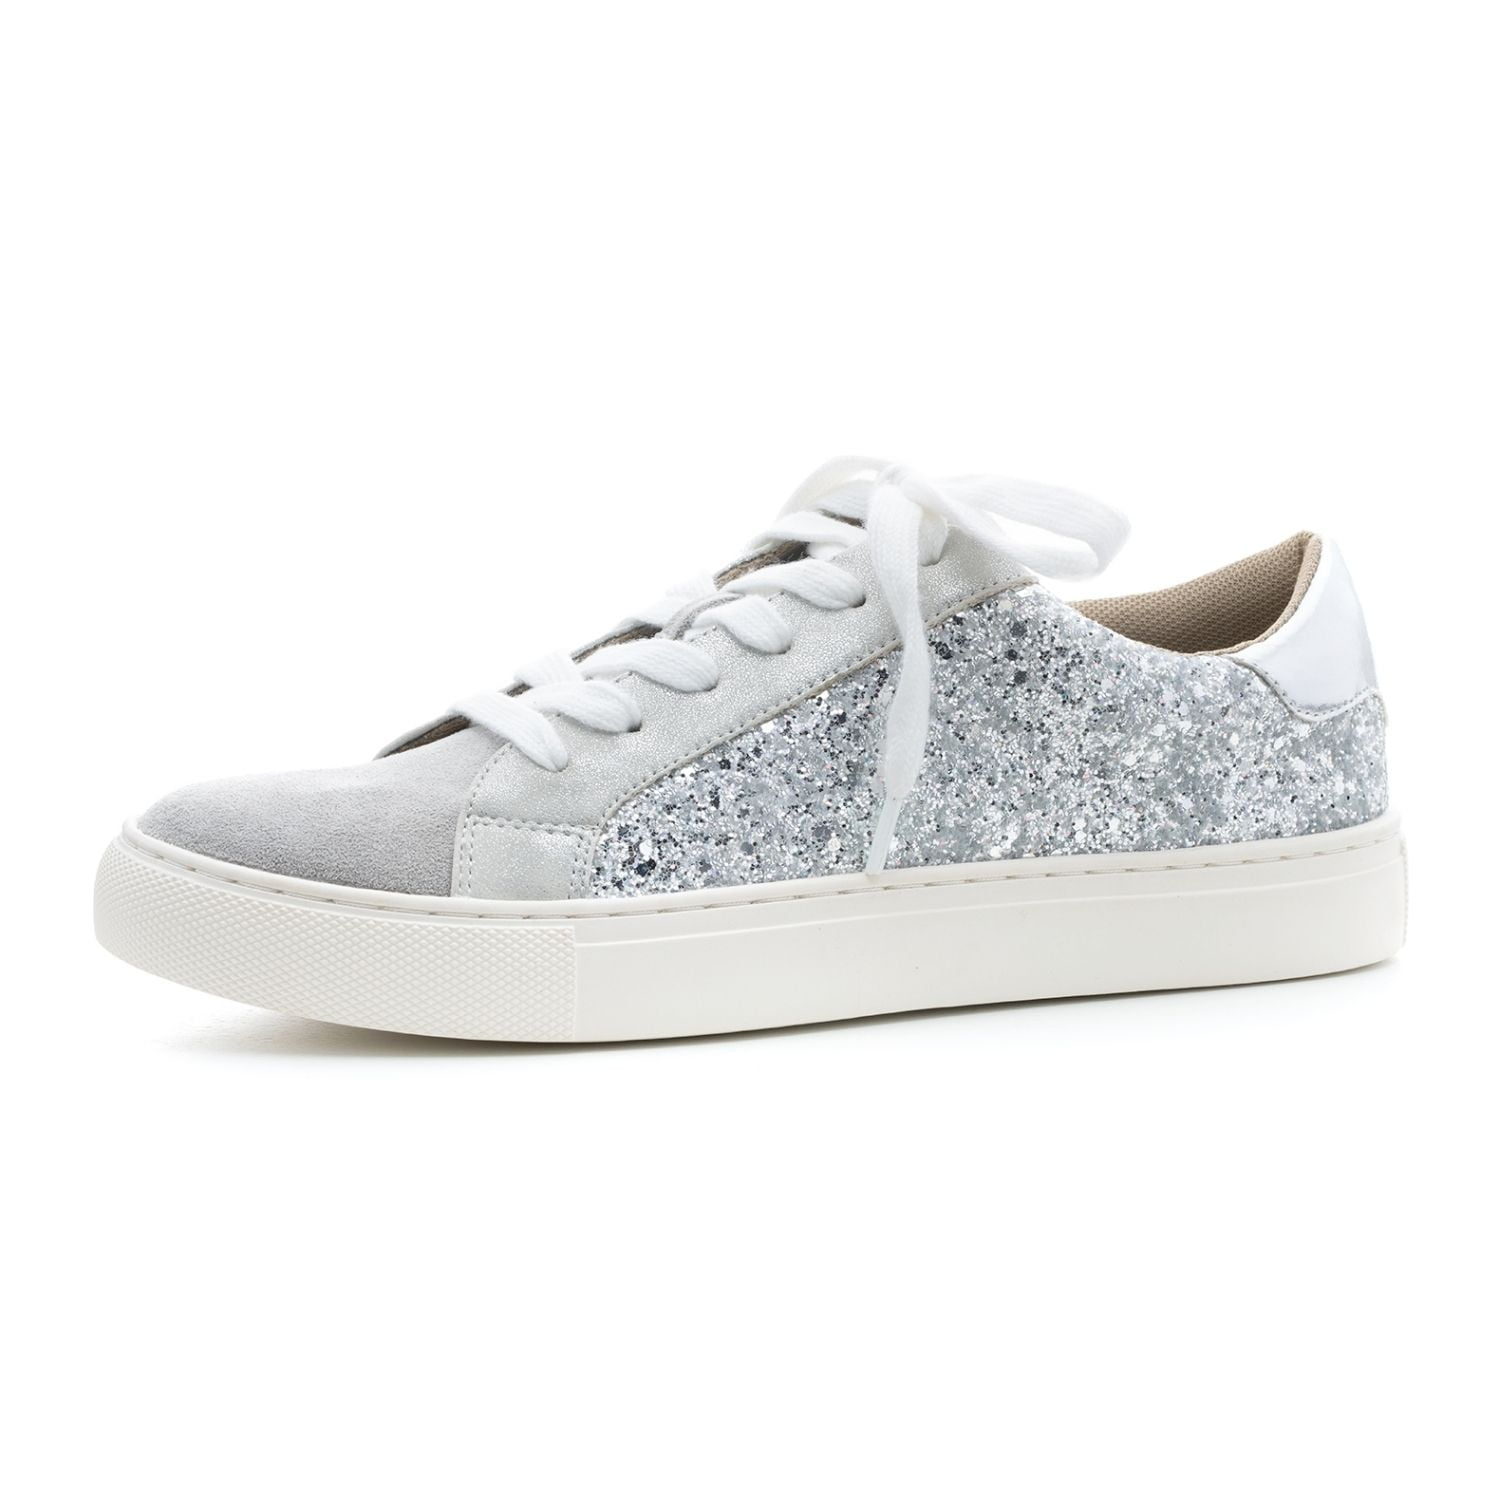 Corkys Bedazzle Sneakers - The Cherry Lane Boutique